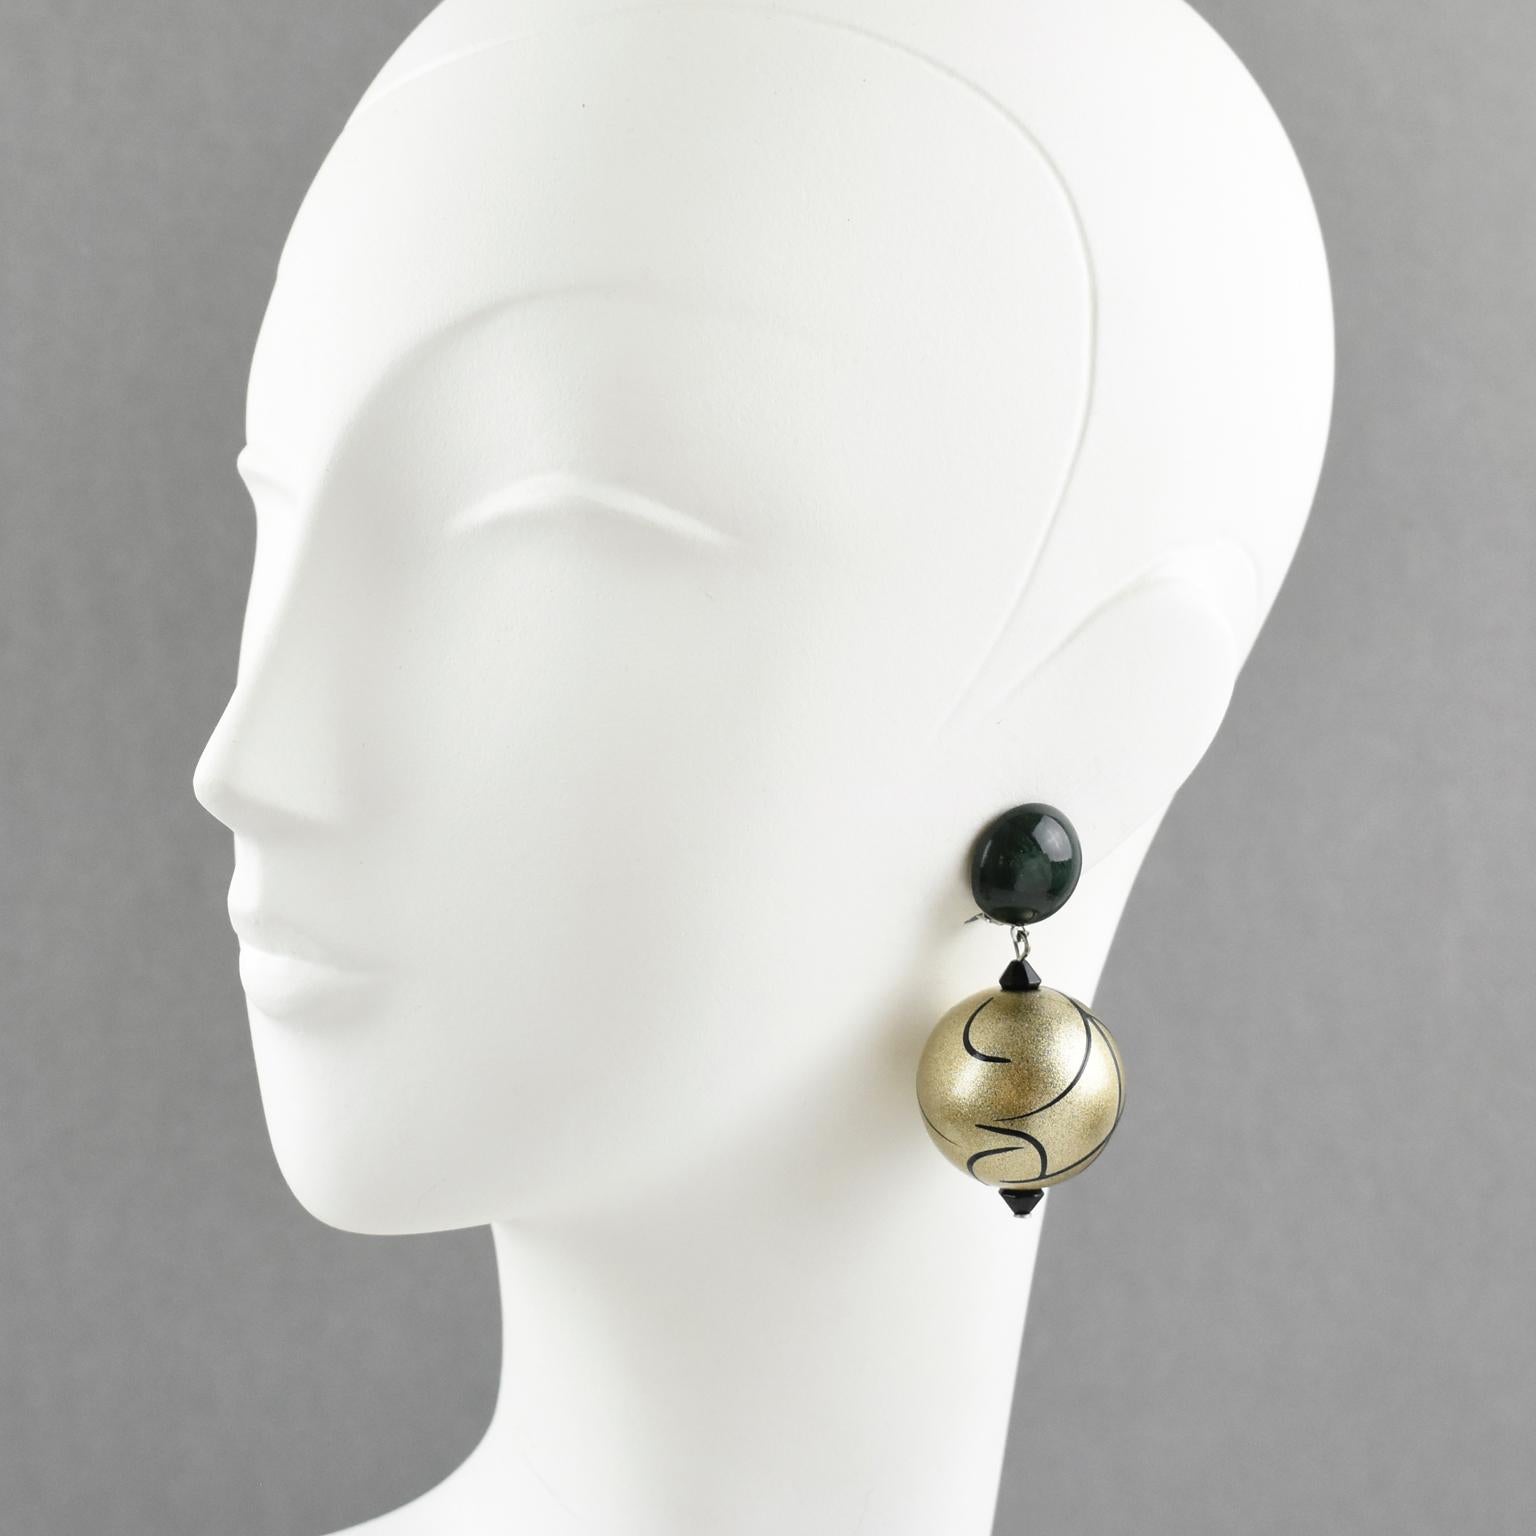 Elegant Angela Caputi, made in Italy resin clip-on earrings. Dangling shape with forest green marble color contrasted with pale gold resin ball bead all wrapped around with black lines. Her matching of colors is always extremely classy, perfect for